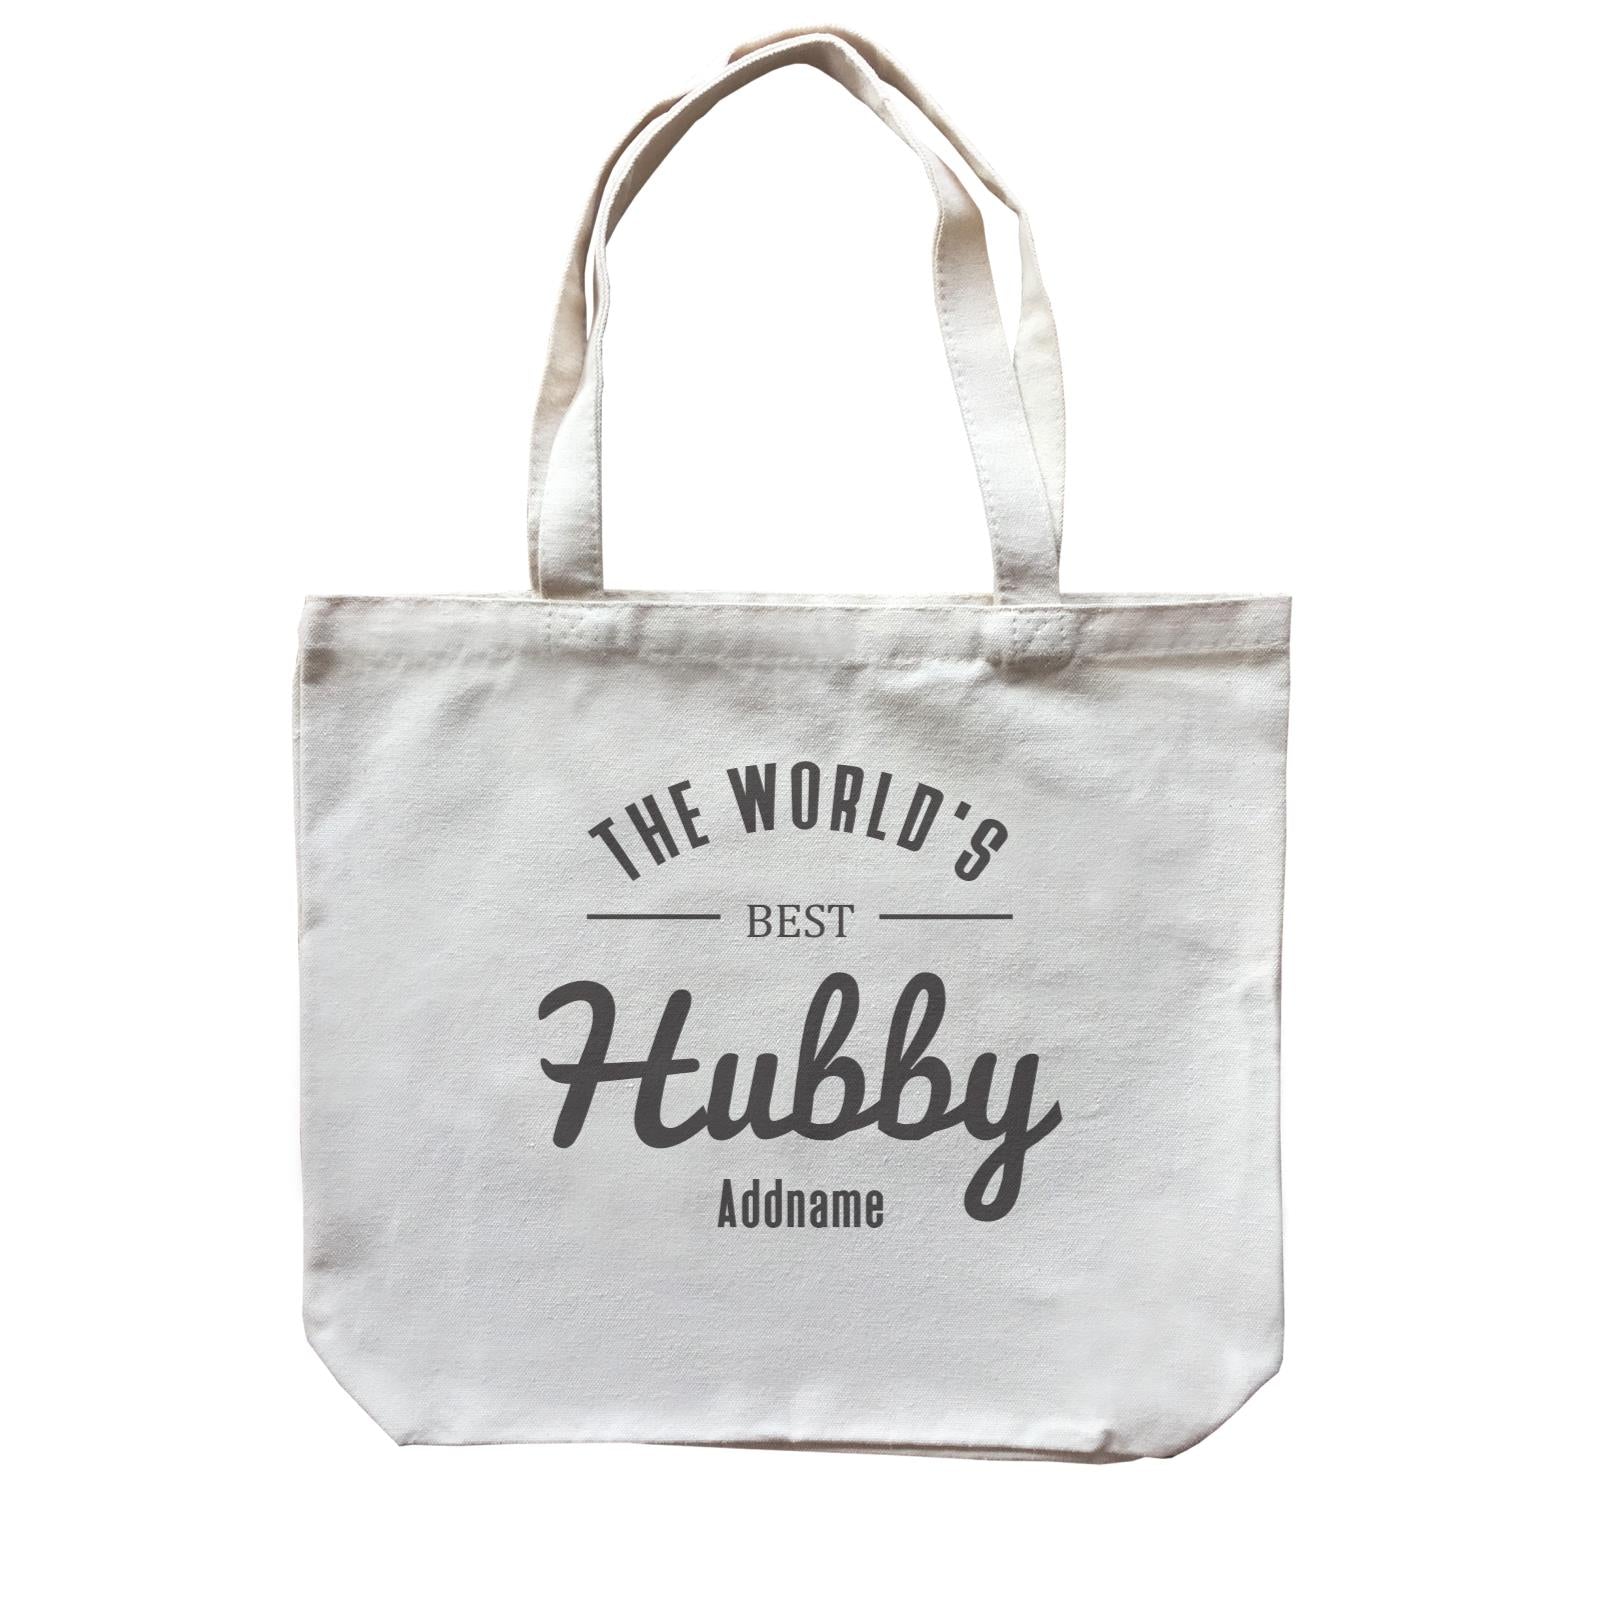 Husband and Wife The World's Best Hubby Addname Canvas Bag